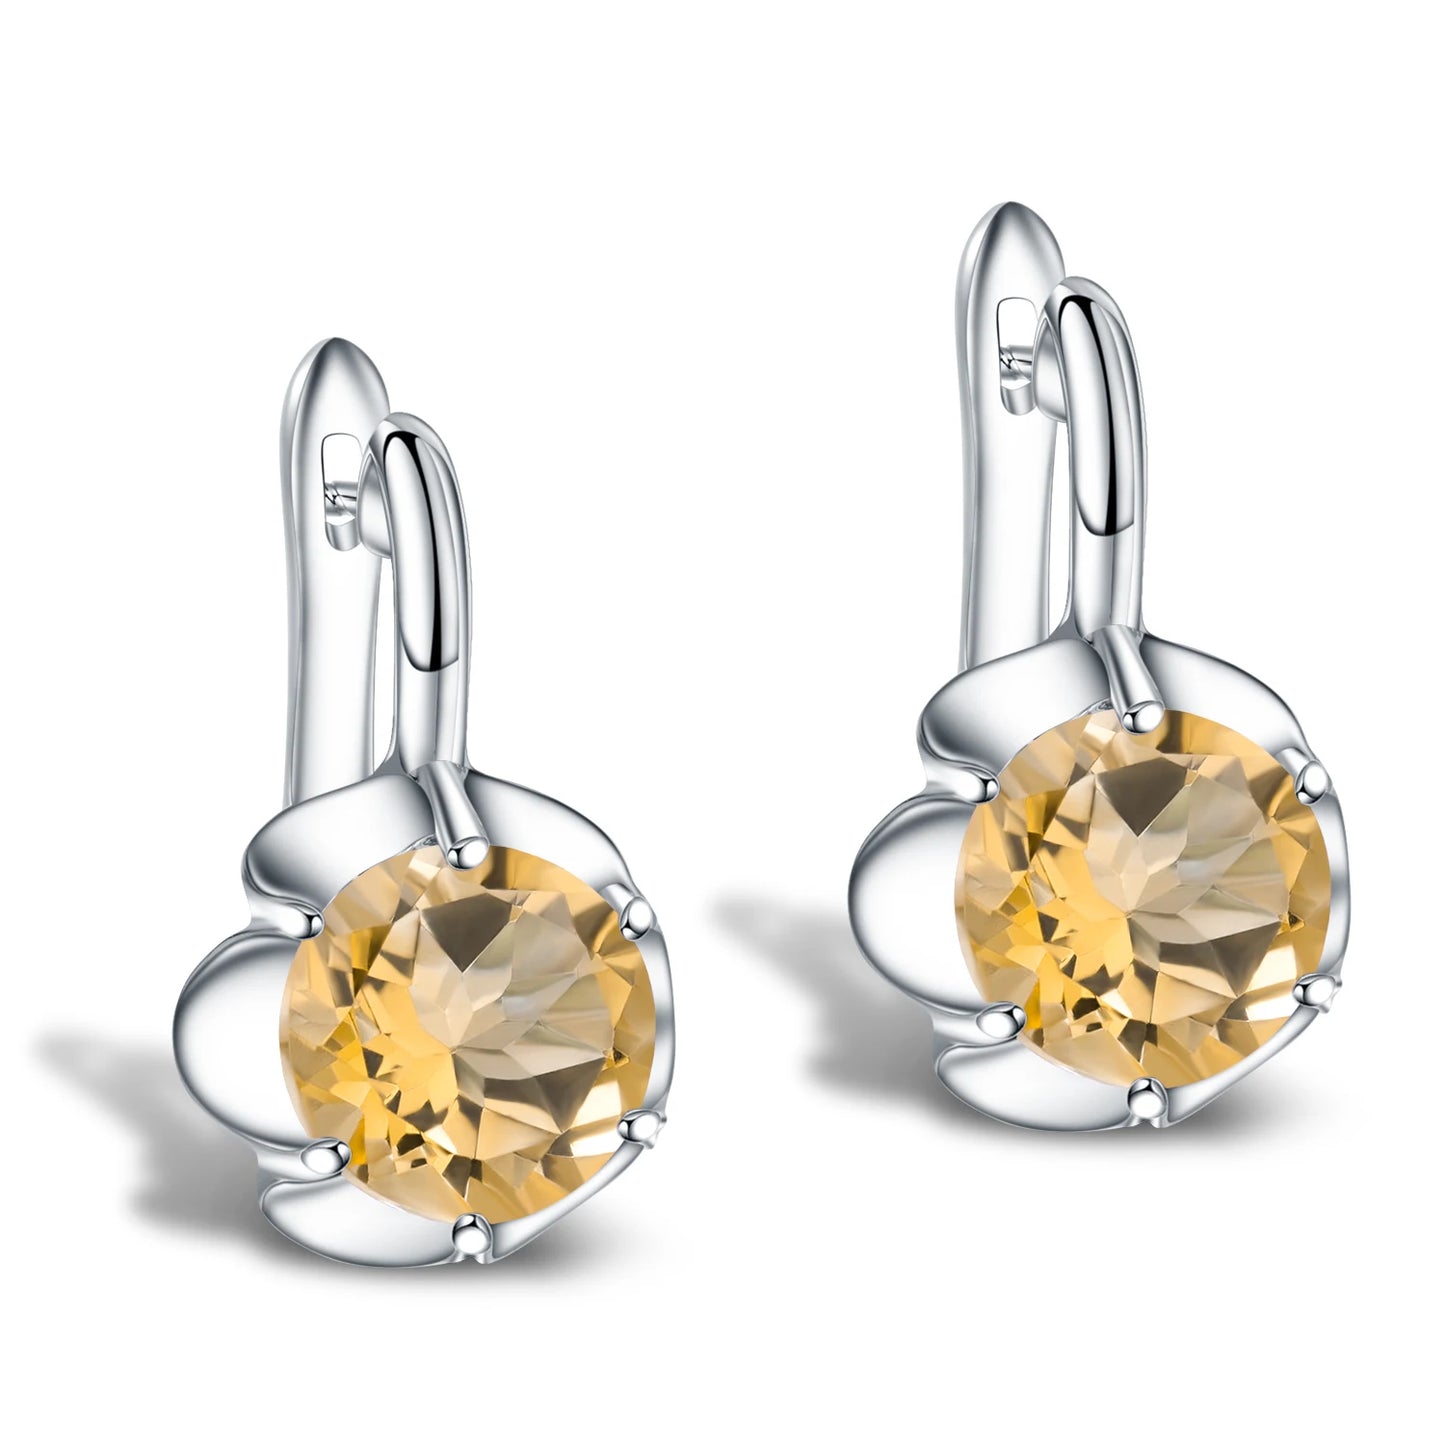 GEM'S BALLET Pure 925 Sterling Silver Fine Jewelry Oval 5.47Ct Natural Green Amethyst Birthstone Stud Earrings For Women Citrine 925 Sterling Silver CHINA